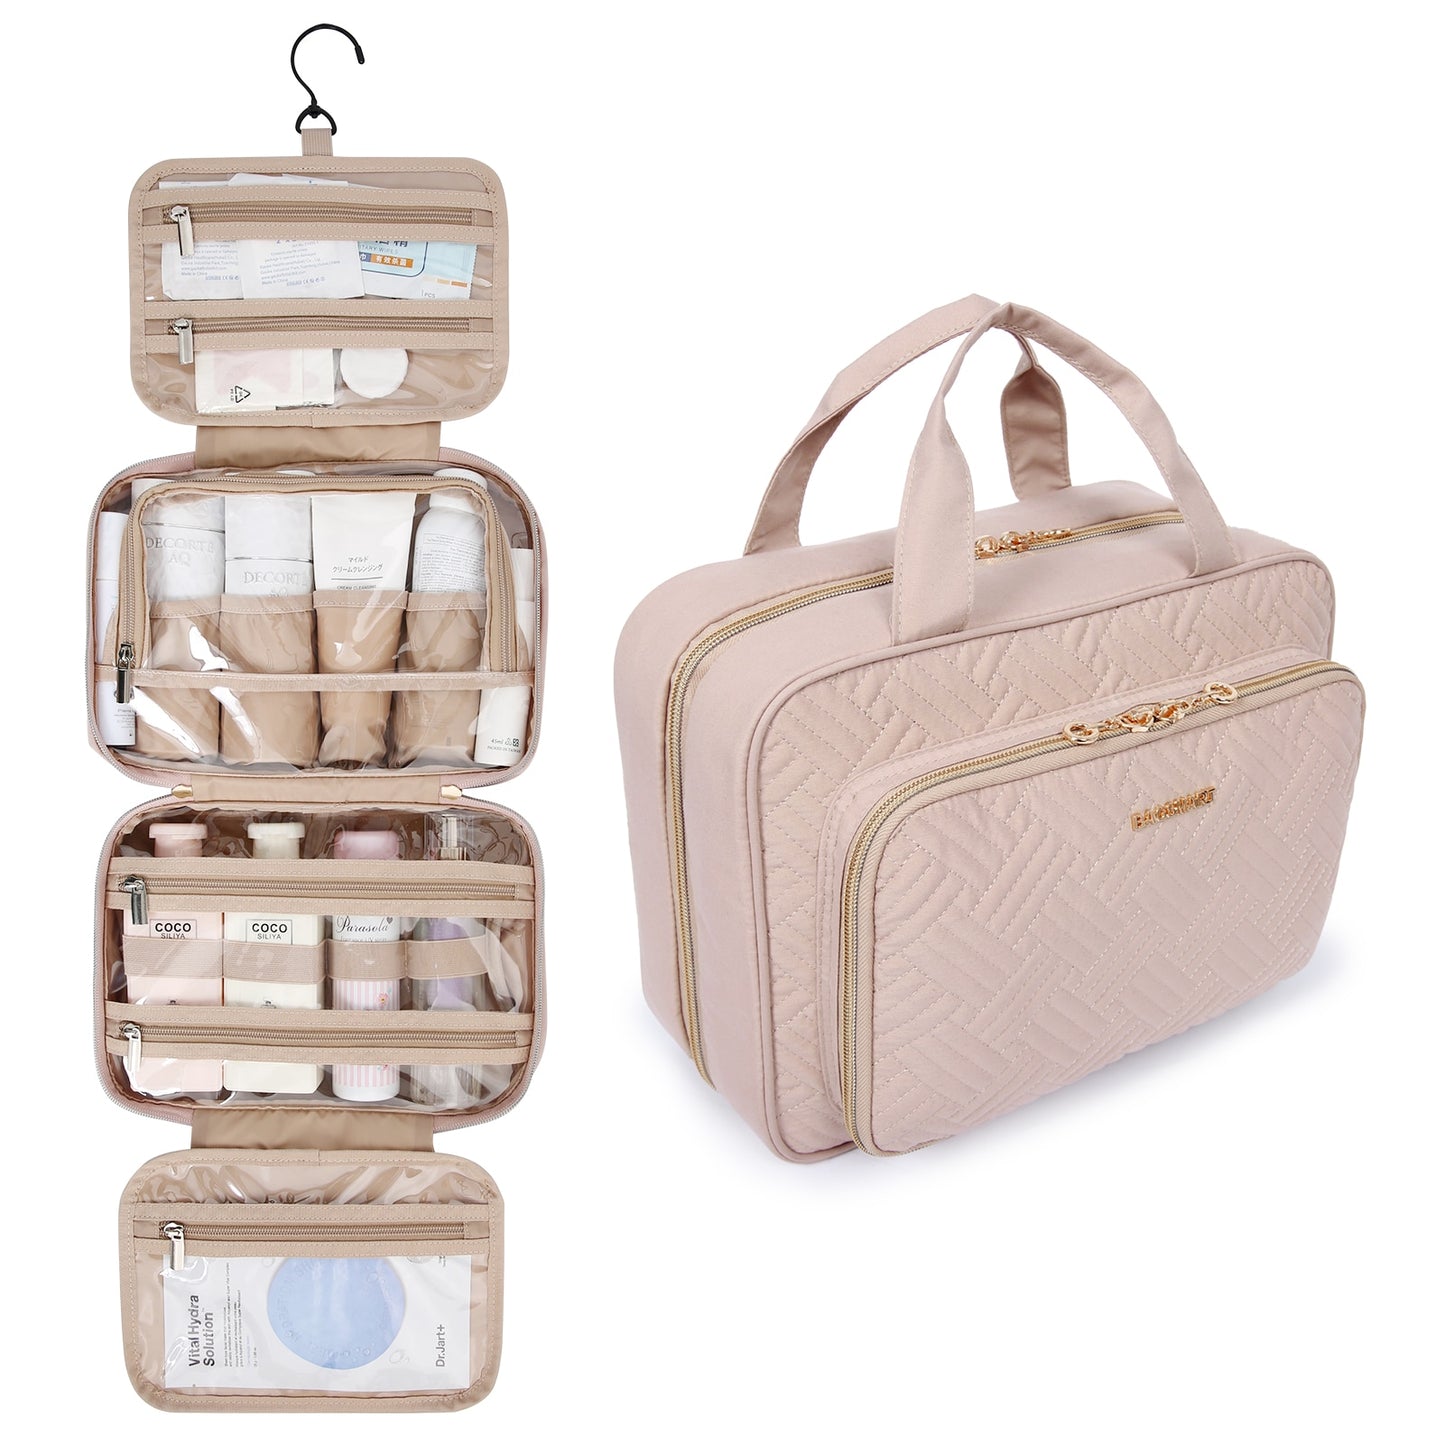 BAGSMART 30 Pieces Wholesale Toiletry Bag Travel Makeup Organizer Water-resistant Cosmetic Bag for Shampoo Full Sized Container